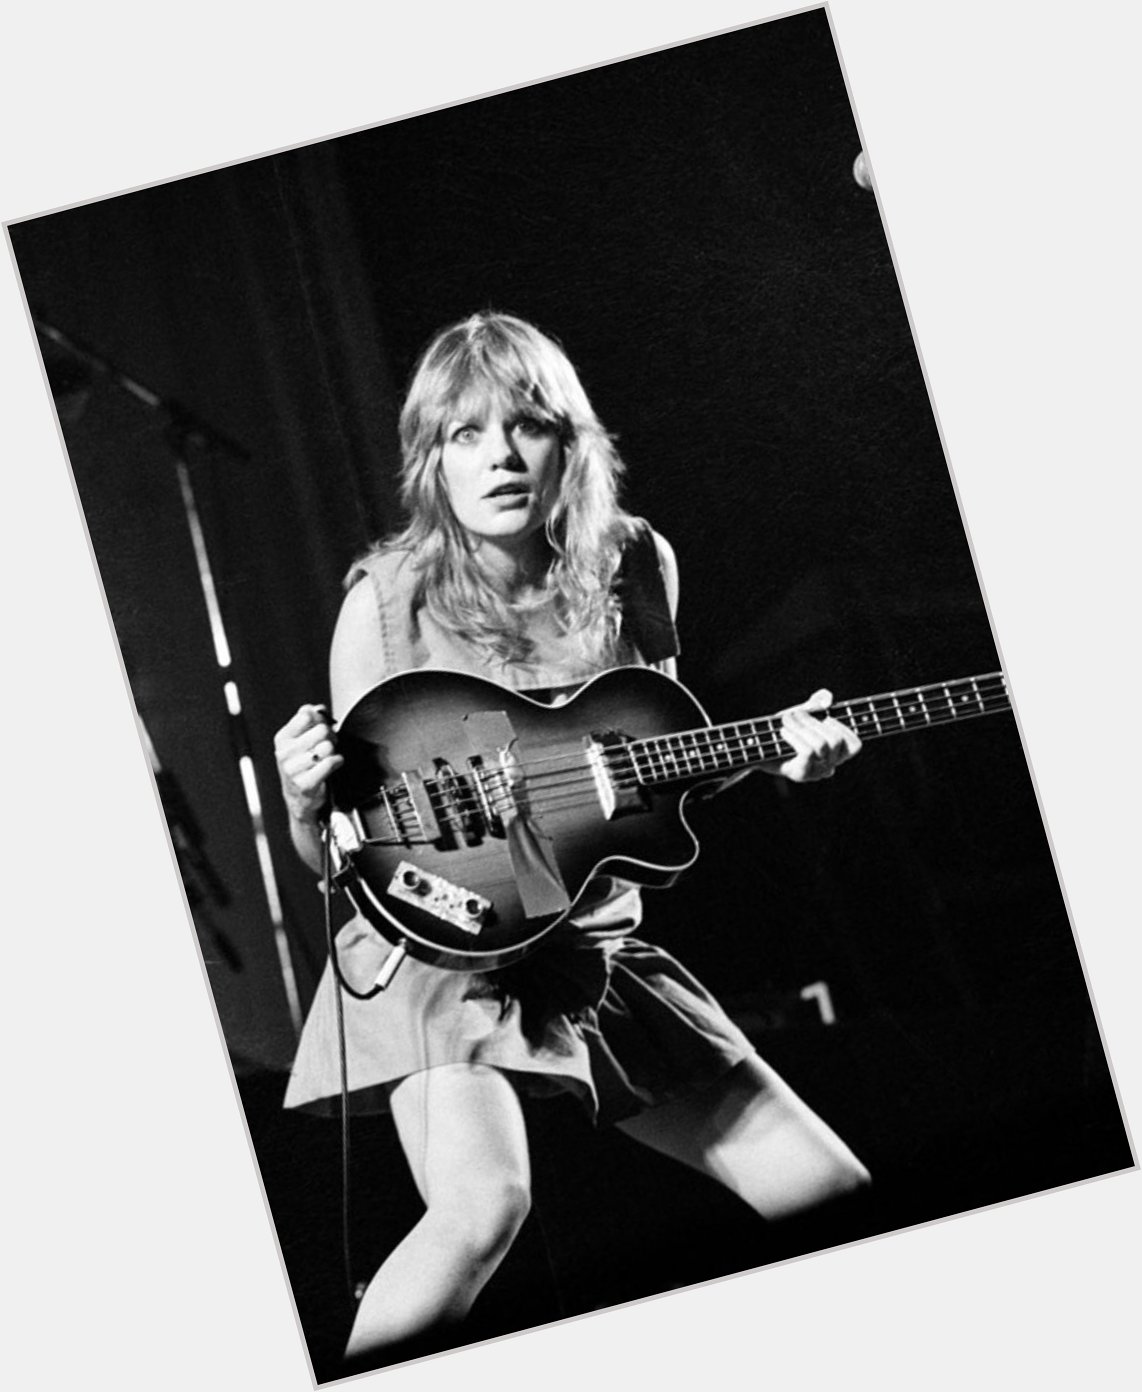 The one and only Tina Weymouth.
Happy birthday. 